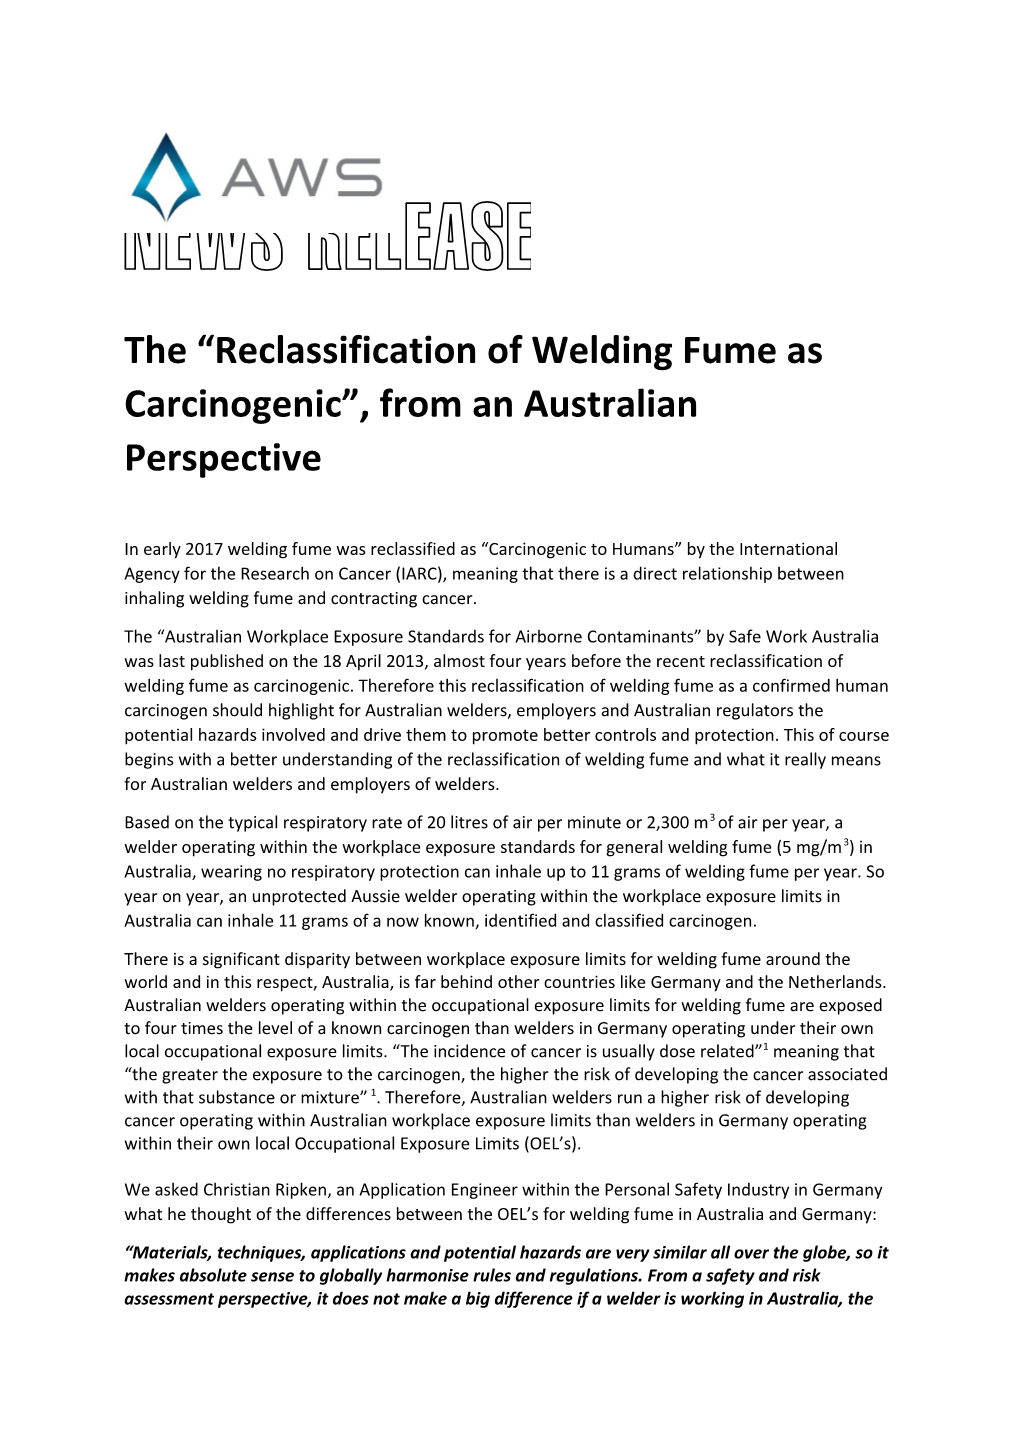 The Reclassification of Welding Fume As Carcinogenic , from an Australian Perspective